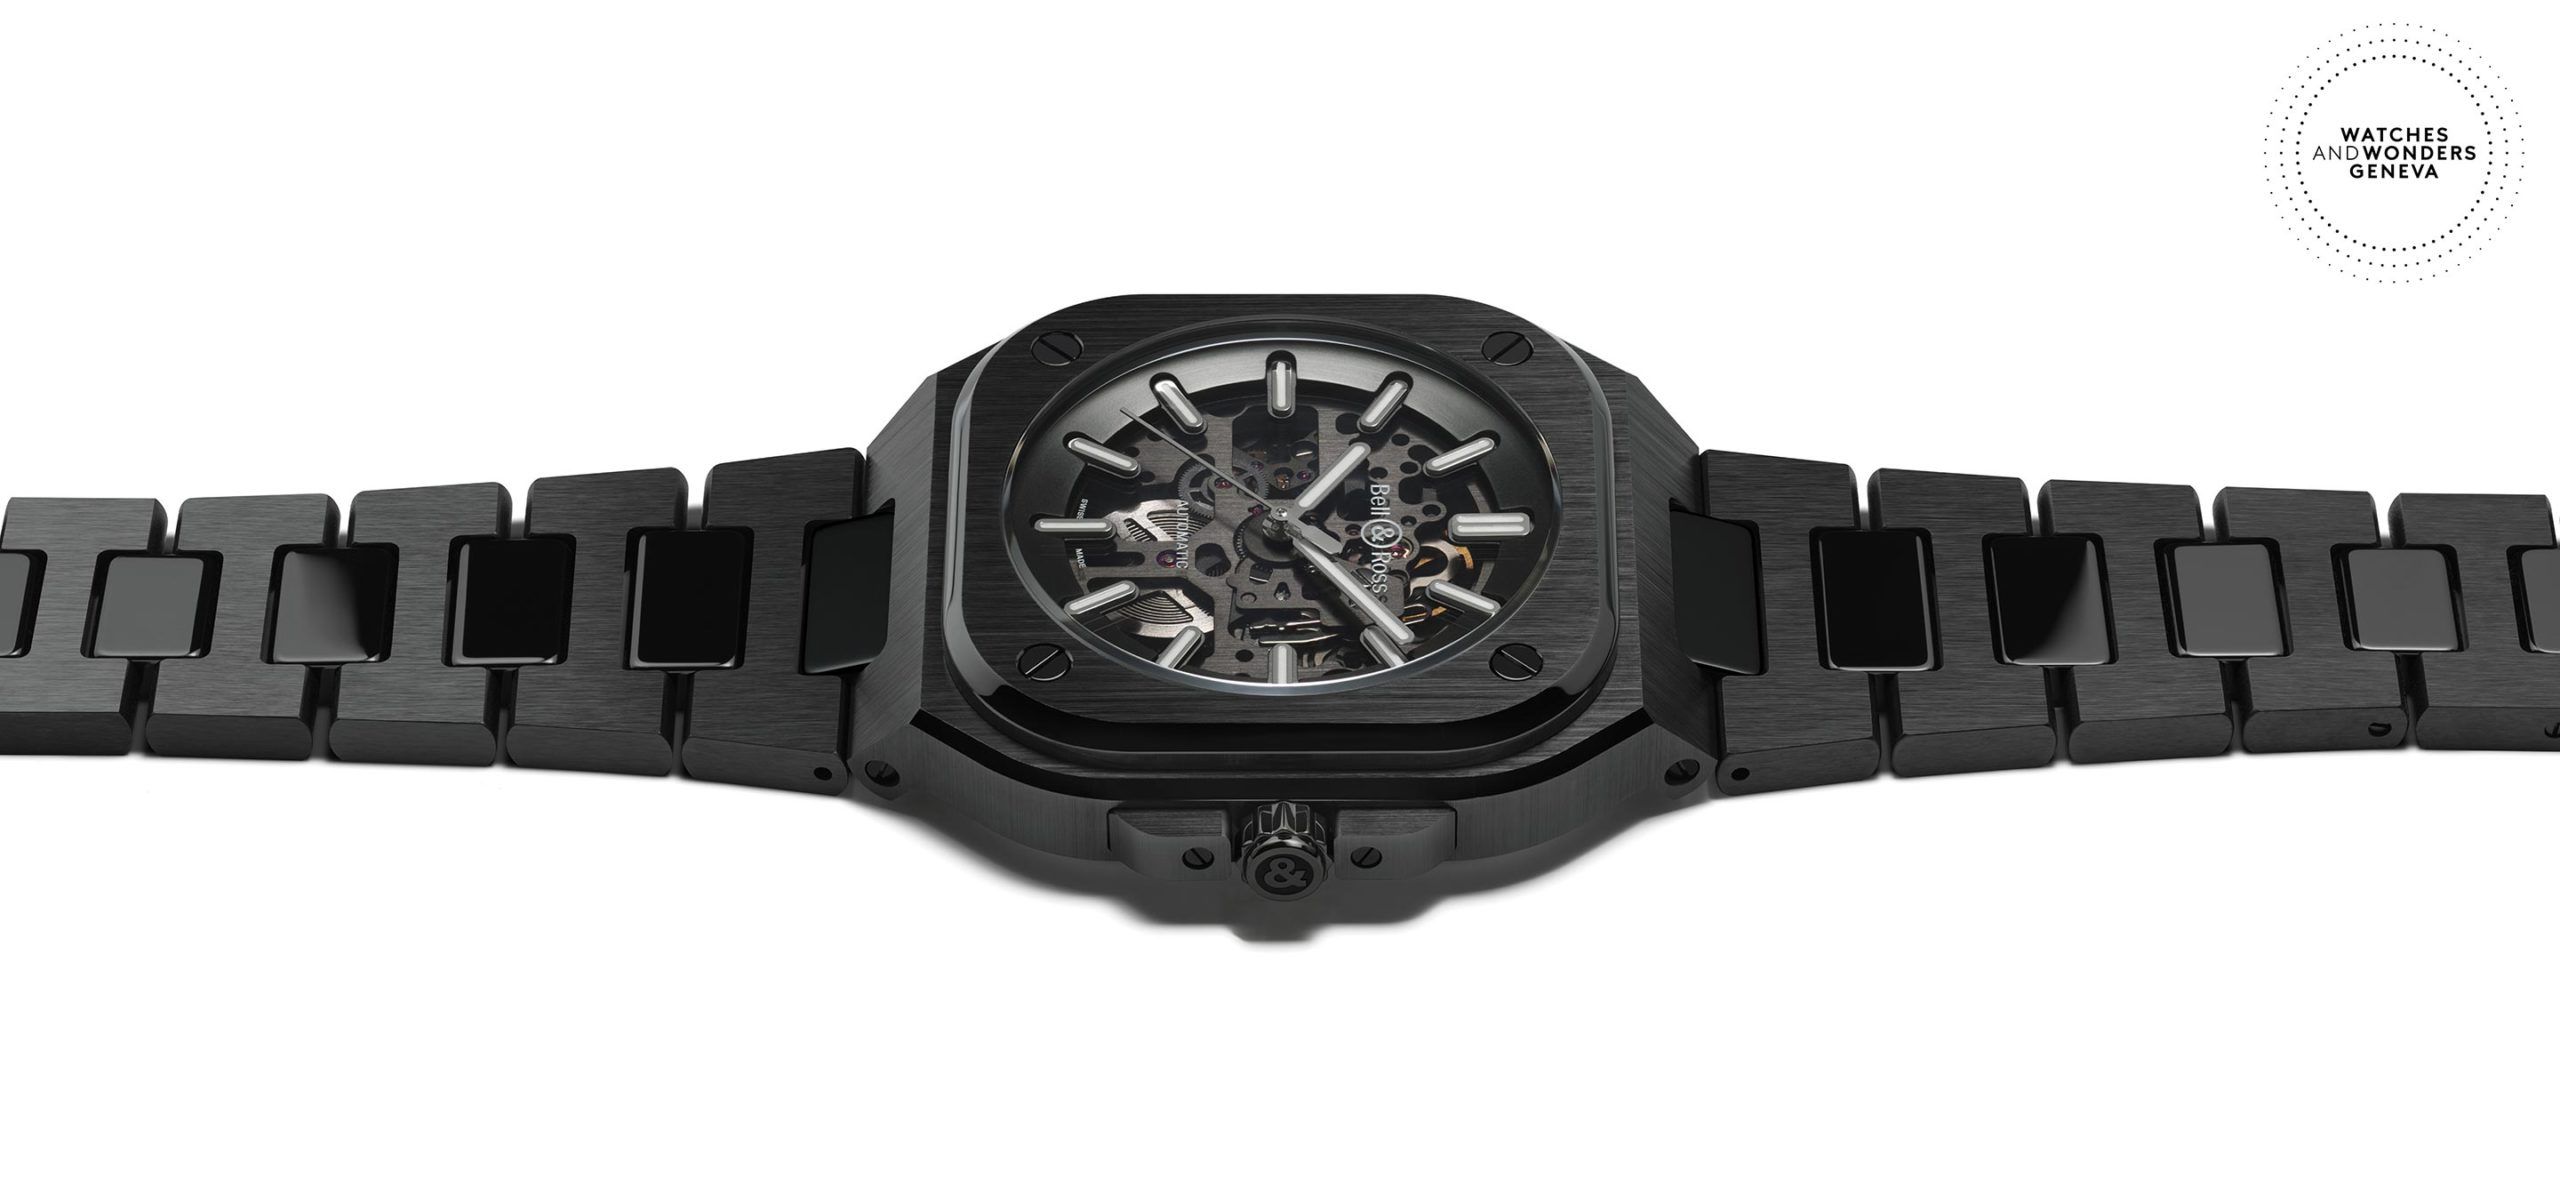 All-Black Ceramic In An Everyday Avatar: Introducing The Bell & Ross BR 05 Black Ceramic Collection